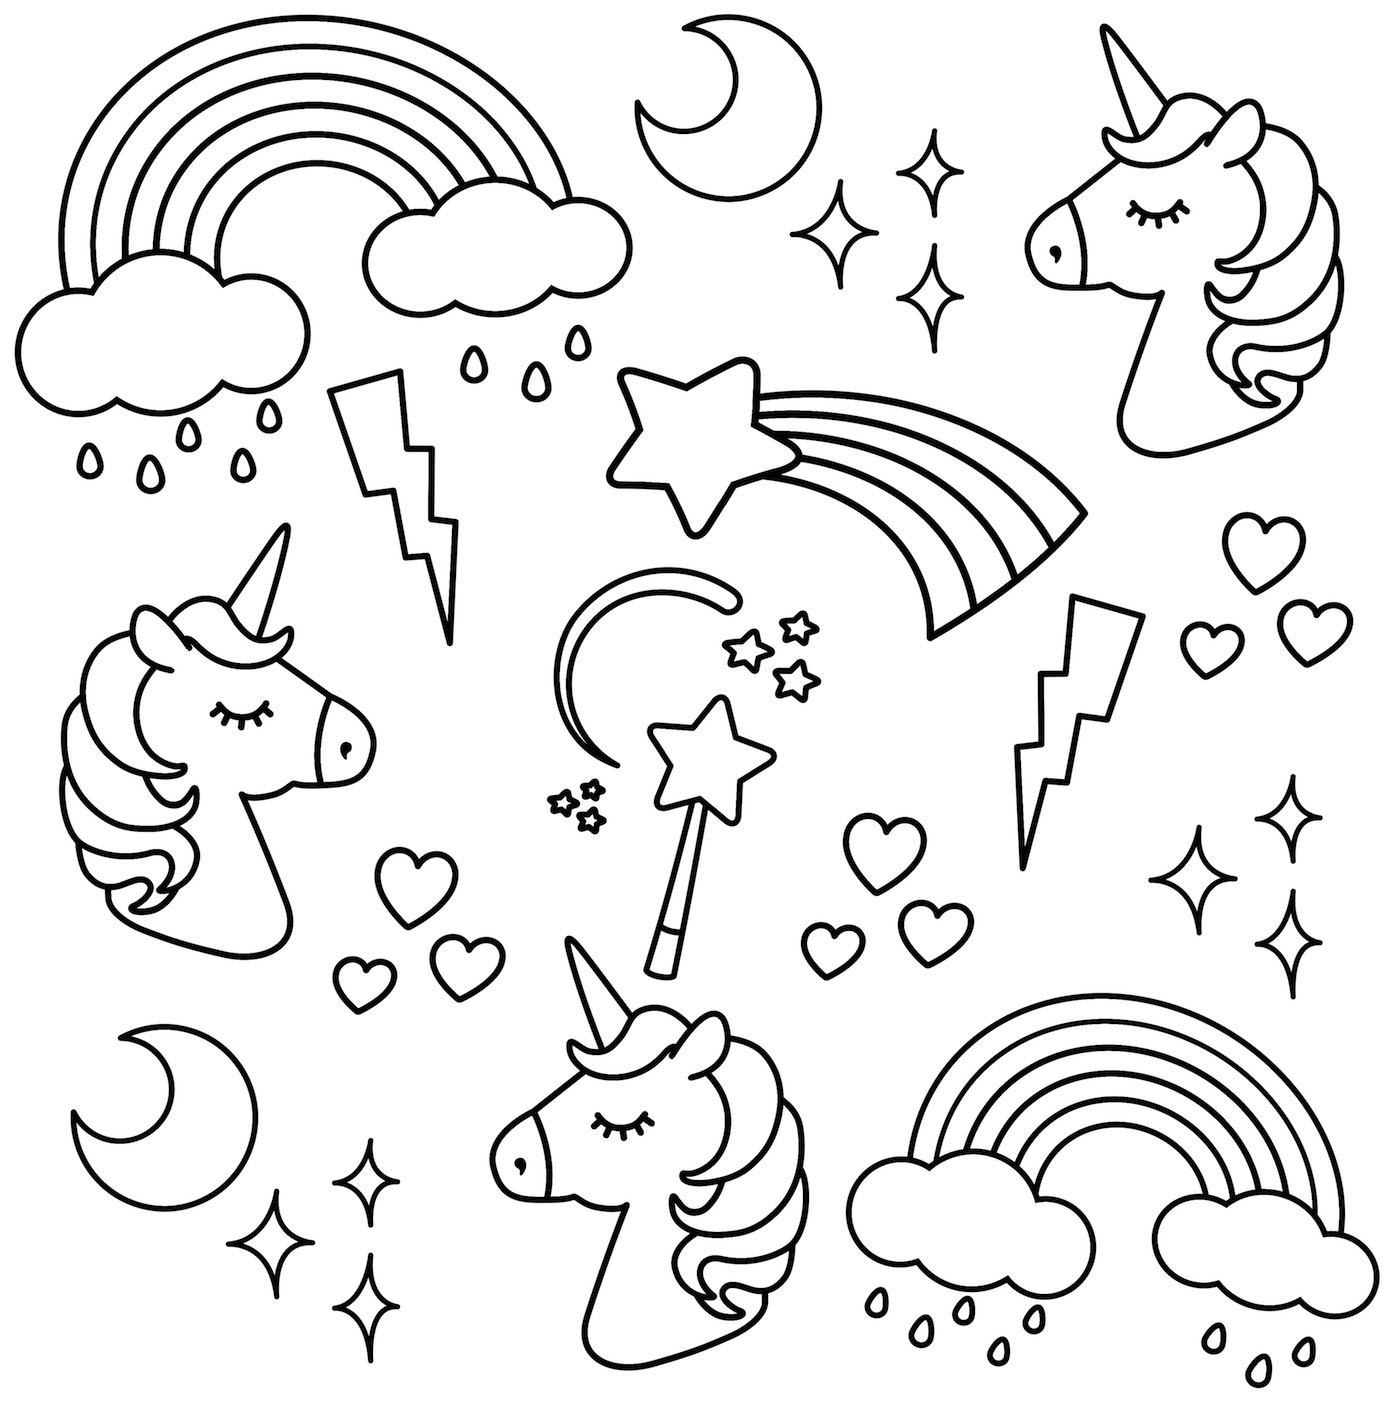 Coloring Pages For Kids Unicorn
 Downloadable unicorn colouring page Michael O Mara Books